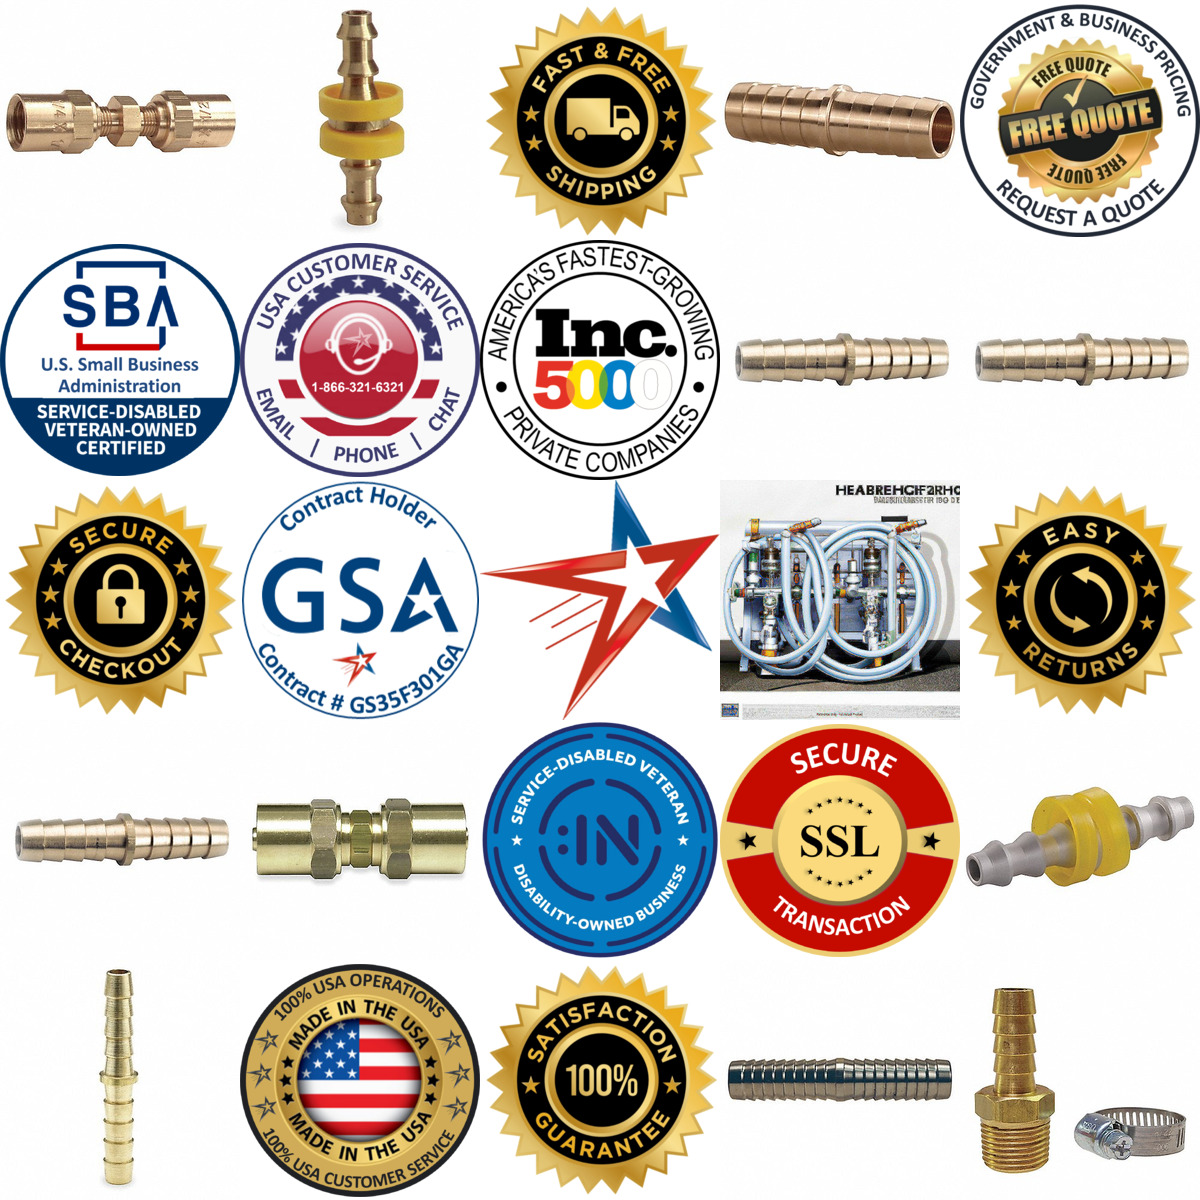 A selection of Air Hose Menders products on GoVets